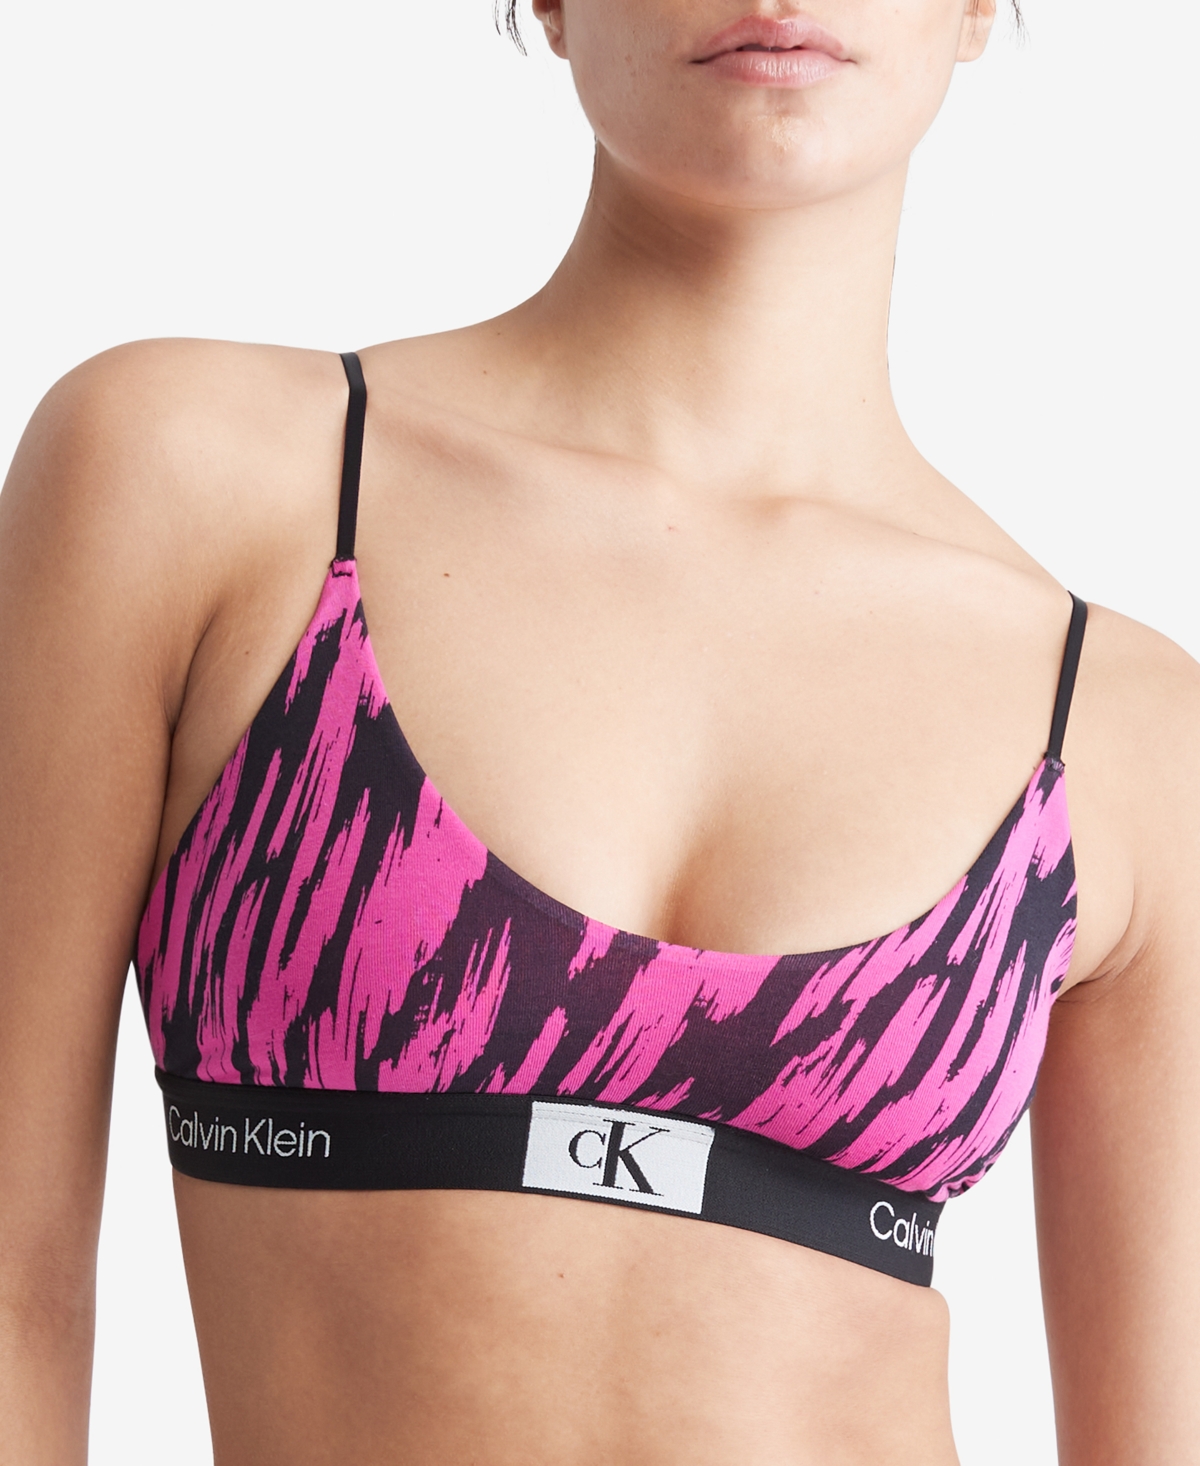 Calvin Klein Women's 1996 Lightly Lined Bralette Qf7218 In Palace Pink  Tiger Print